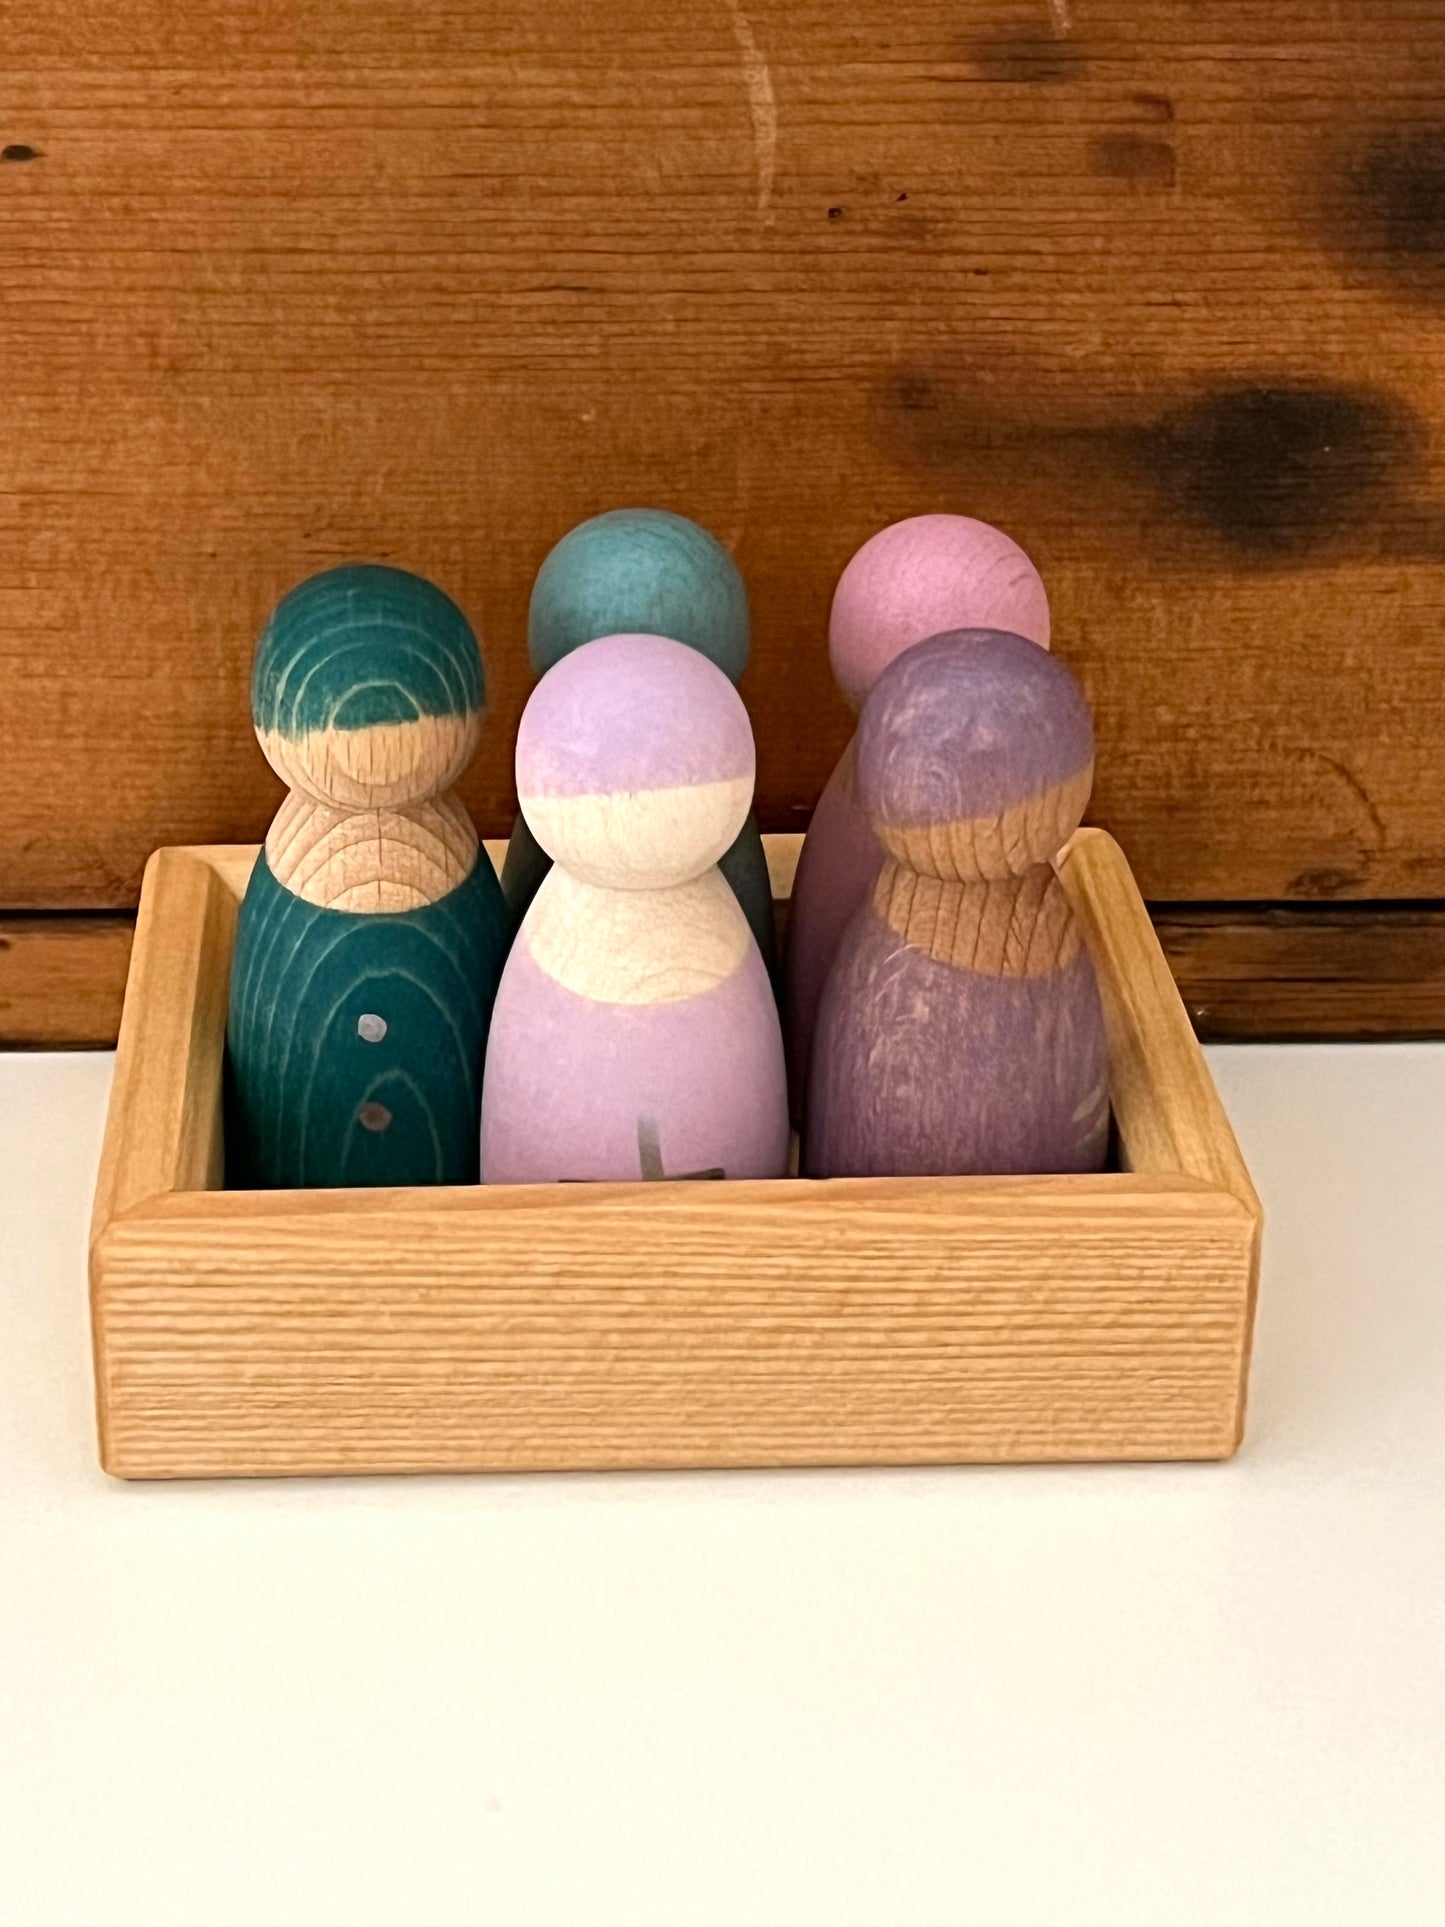 Educational Wooden Toy - Grimm's MATH FRIENDS, 5 wooden figures!